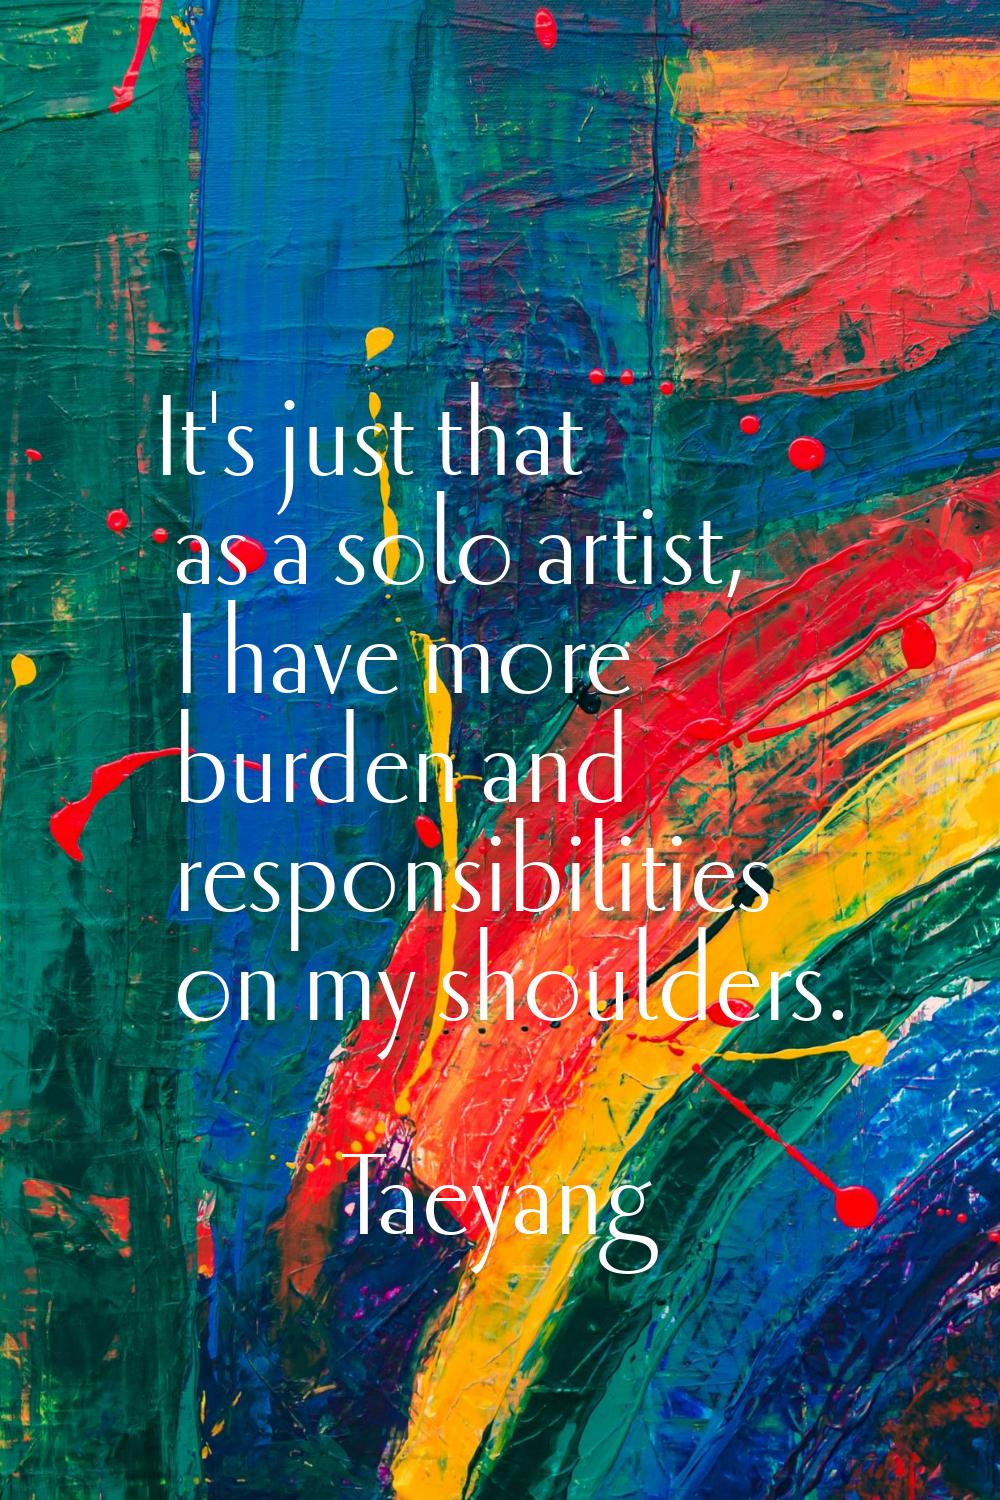 It's just that as a solo artist, I have more burden and responsibilities on my shoulders.